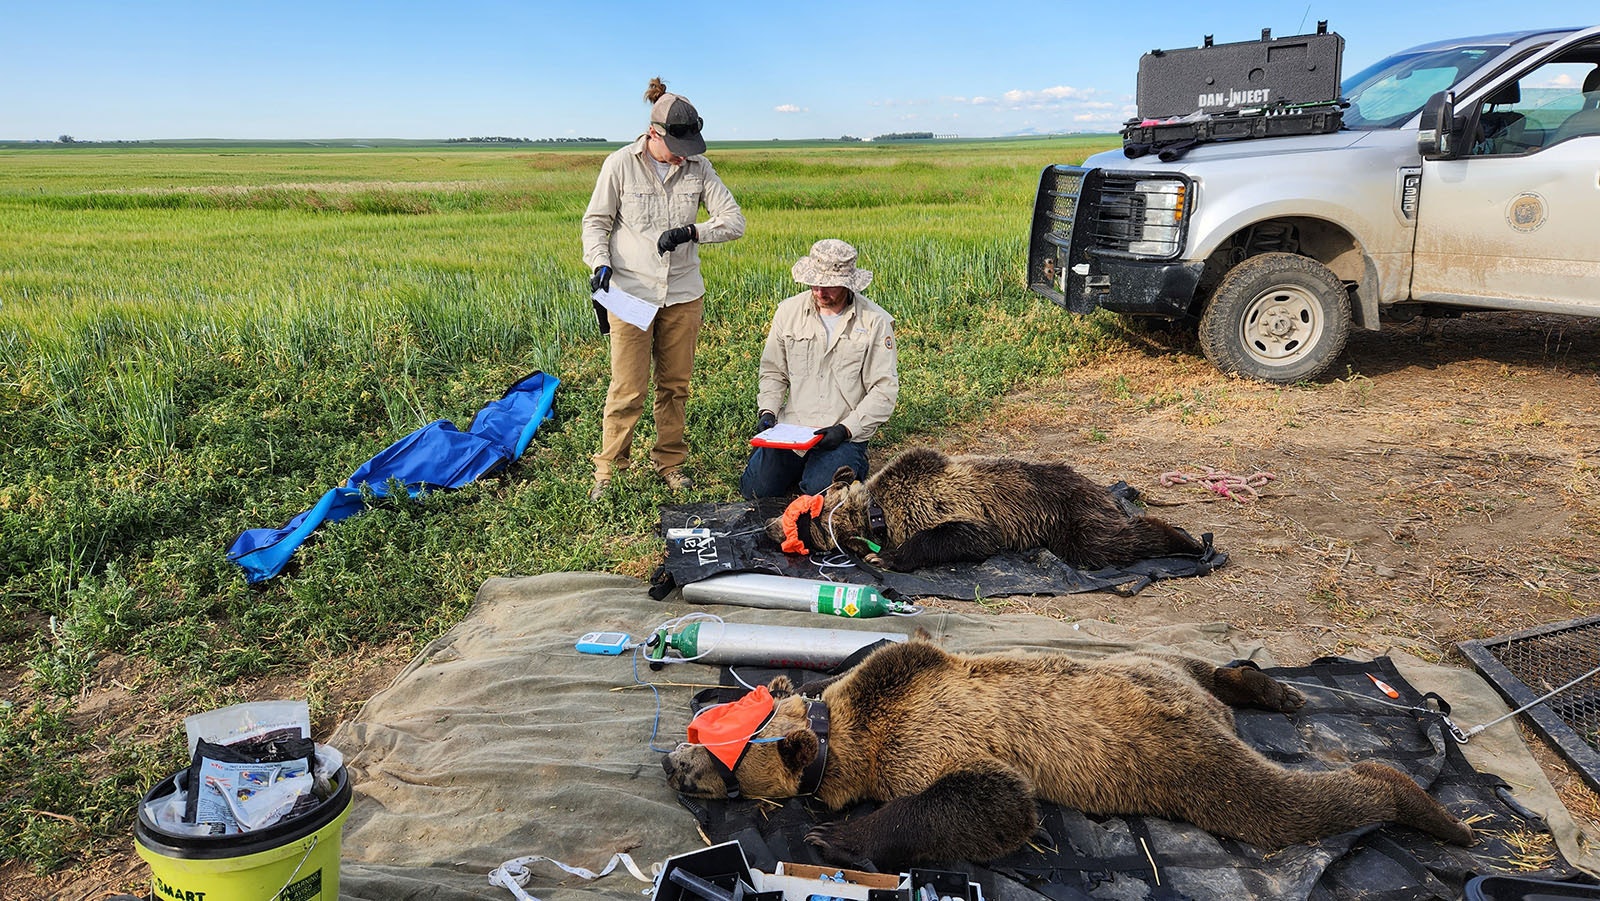 Montana Fish, Wildlife and Parks biologists examine two yearling sibling grizzlies. The young bears, along with a third sibling (not pictured) had to be tranquilized and relocated from the prairie near Valier, Montana earlier this month. They had been hanging around peoples’ houses.